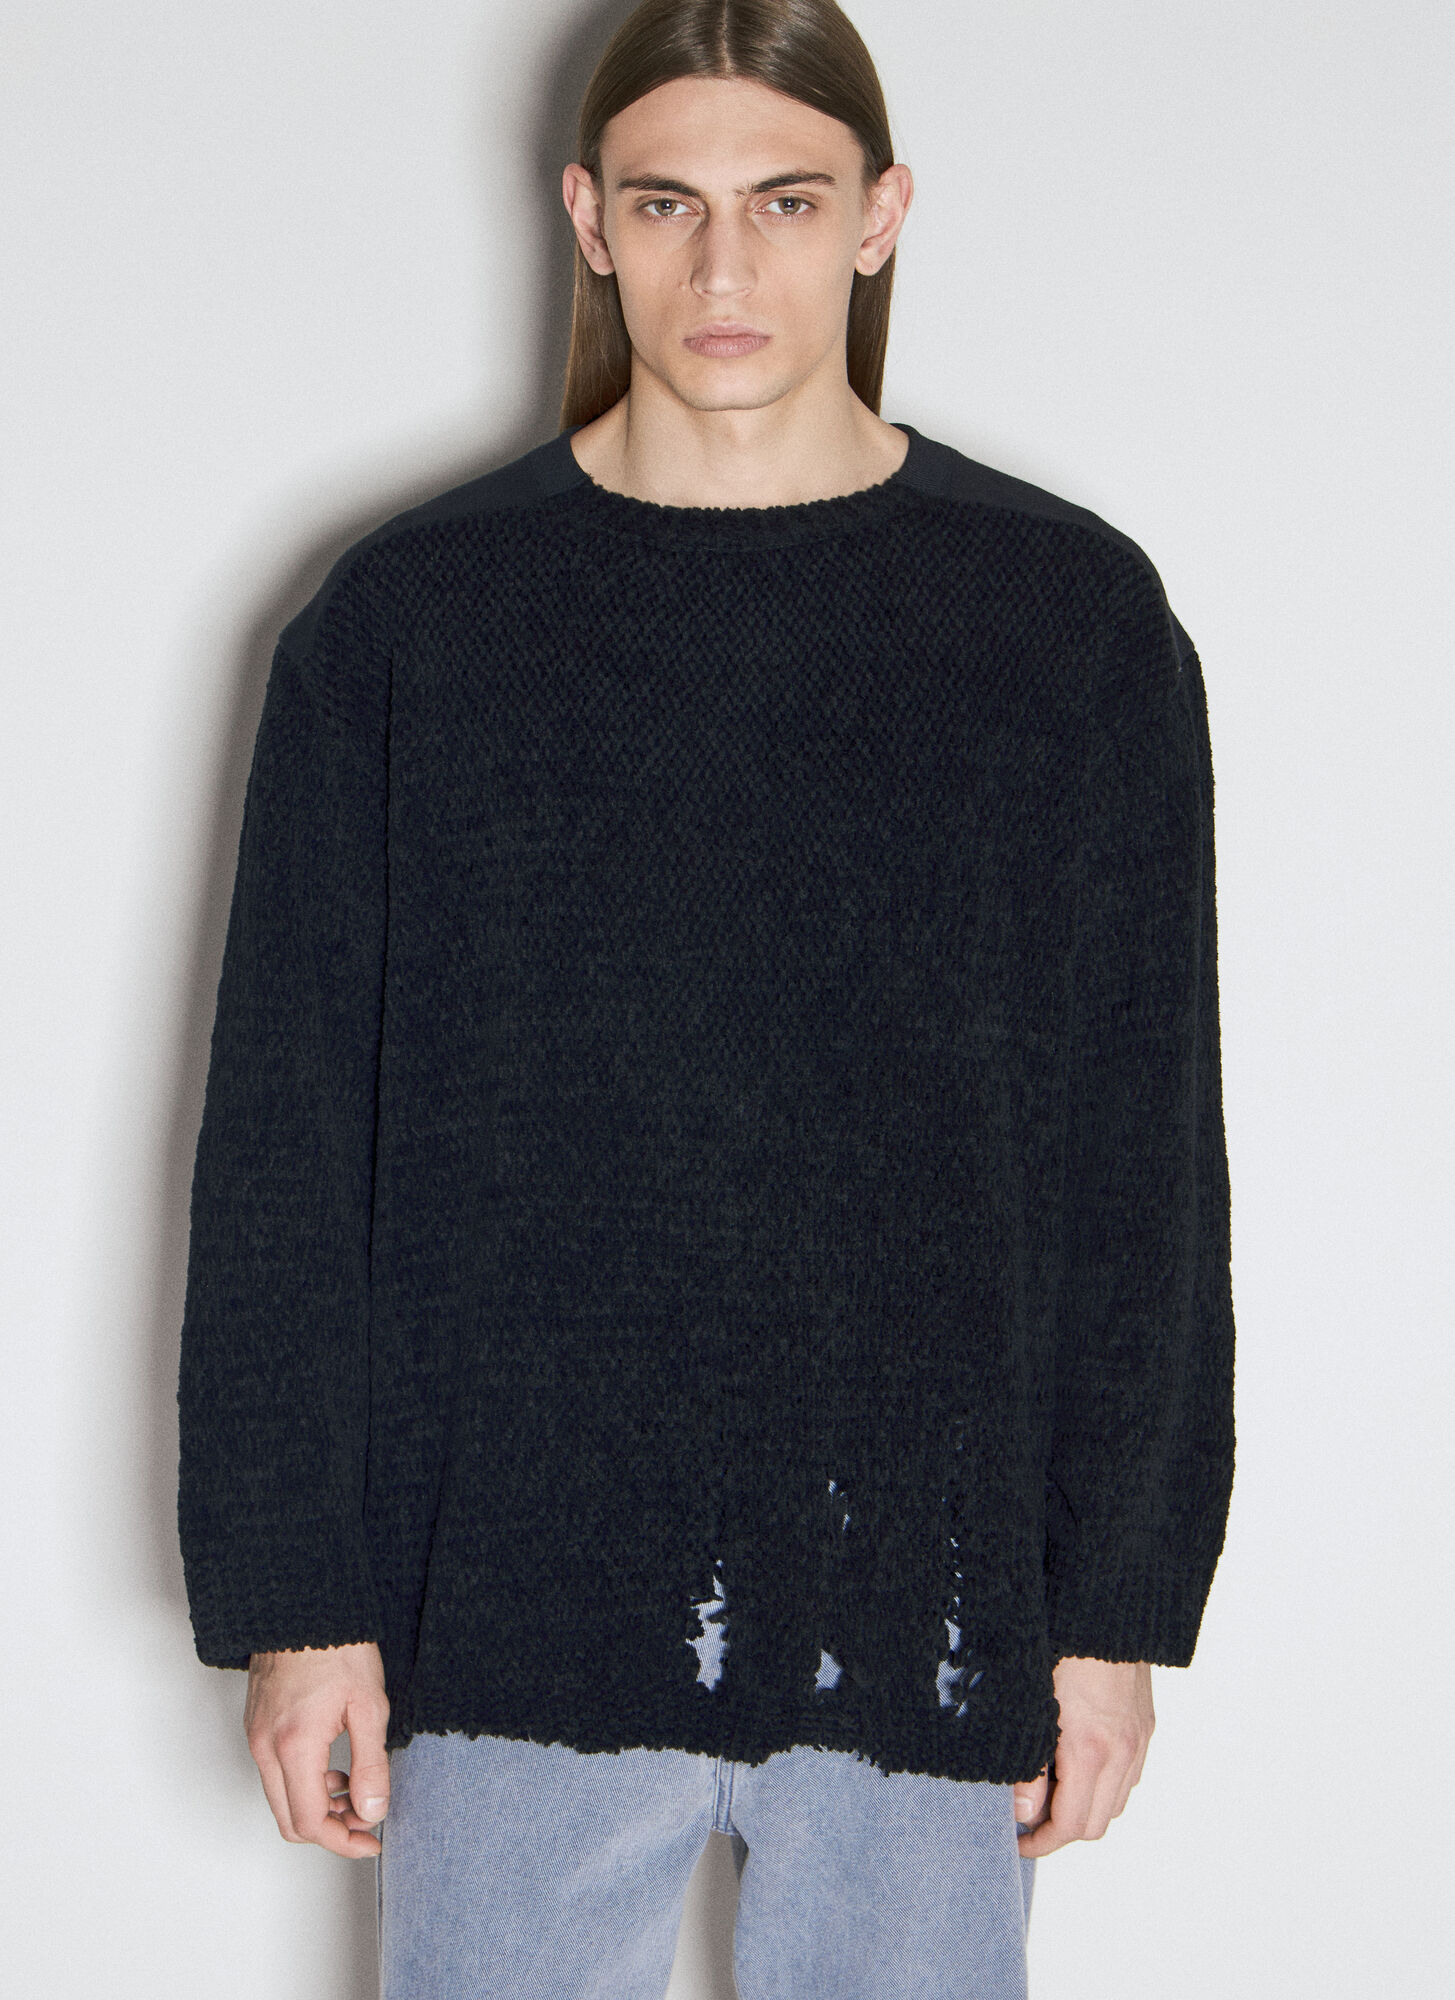 Undercover Distressed Wool Knit Sweater In Black